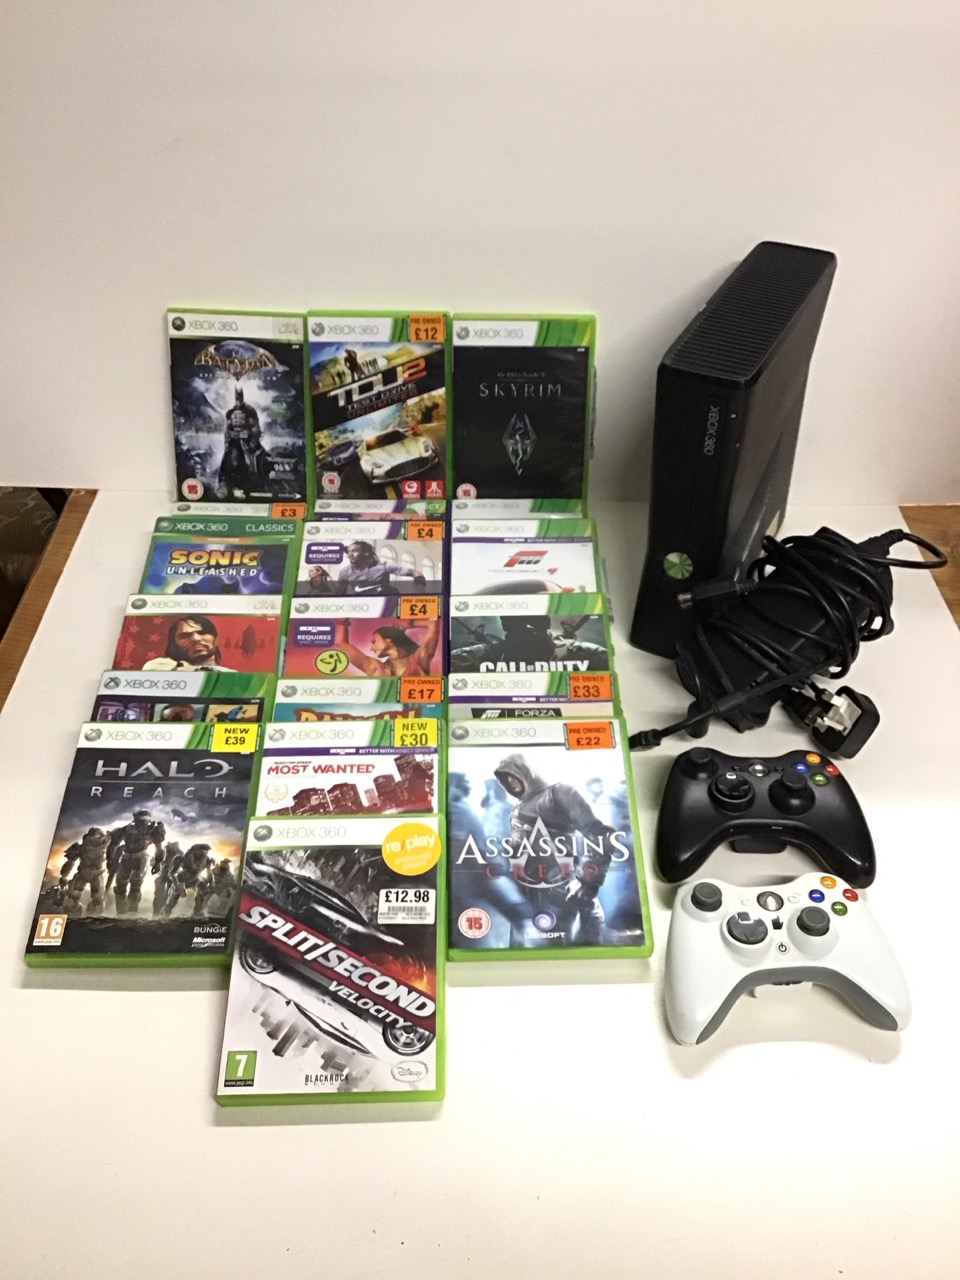 An Xbox 360 games console with AC adapter, two controllers & eighteen game discs including Halo